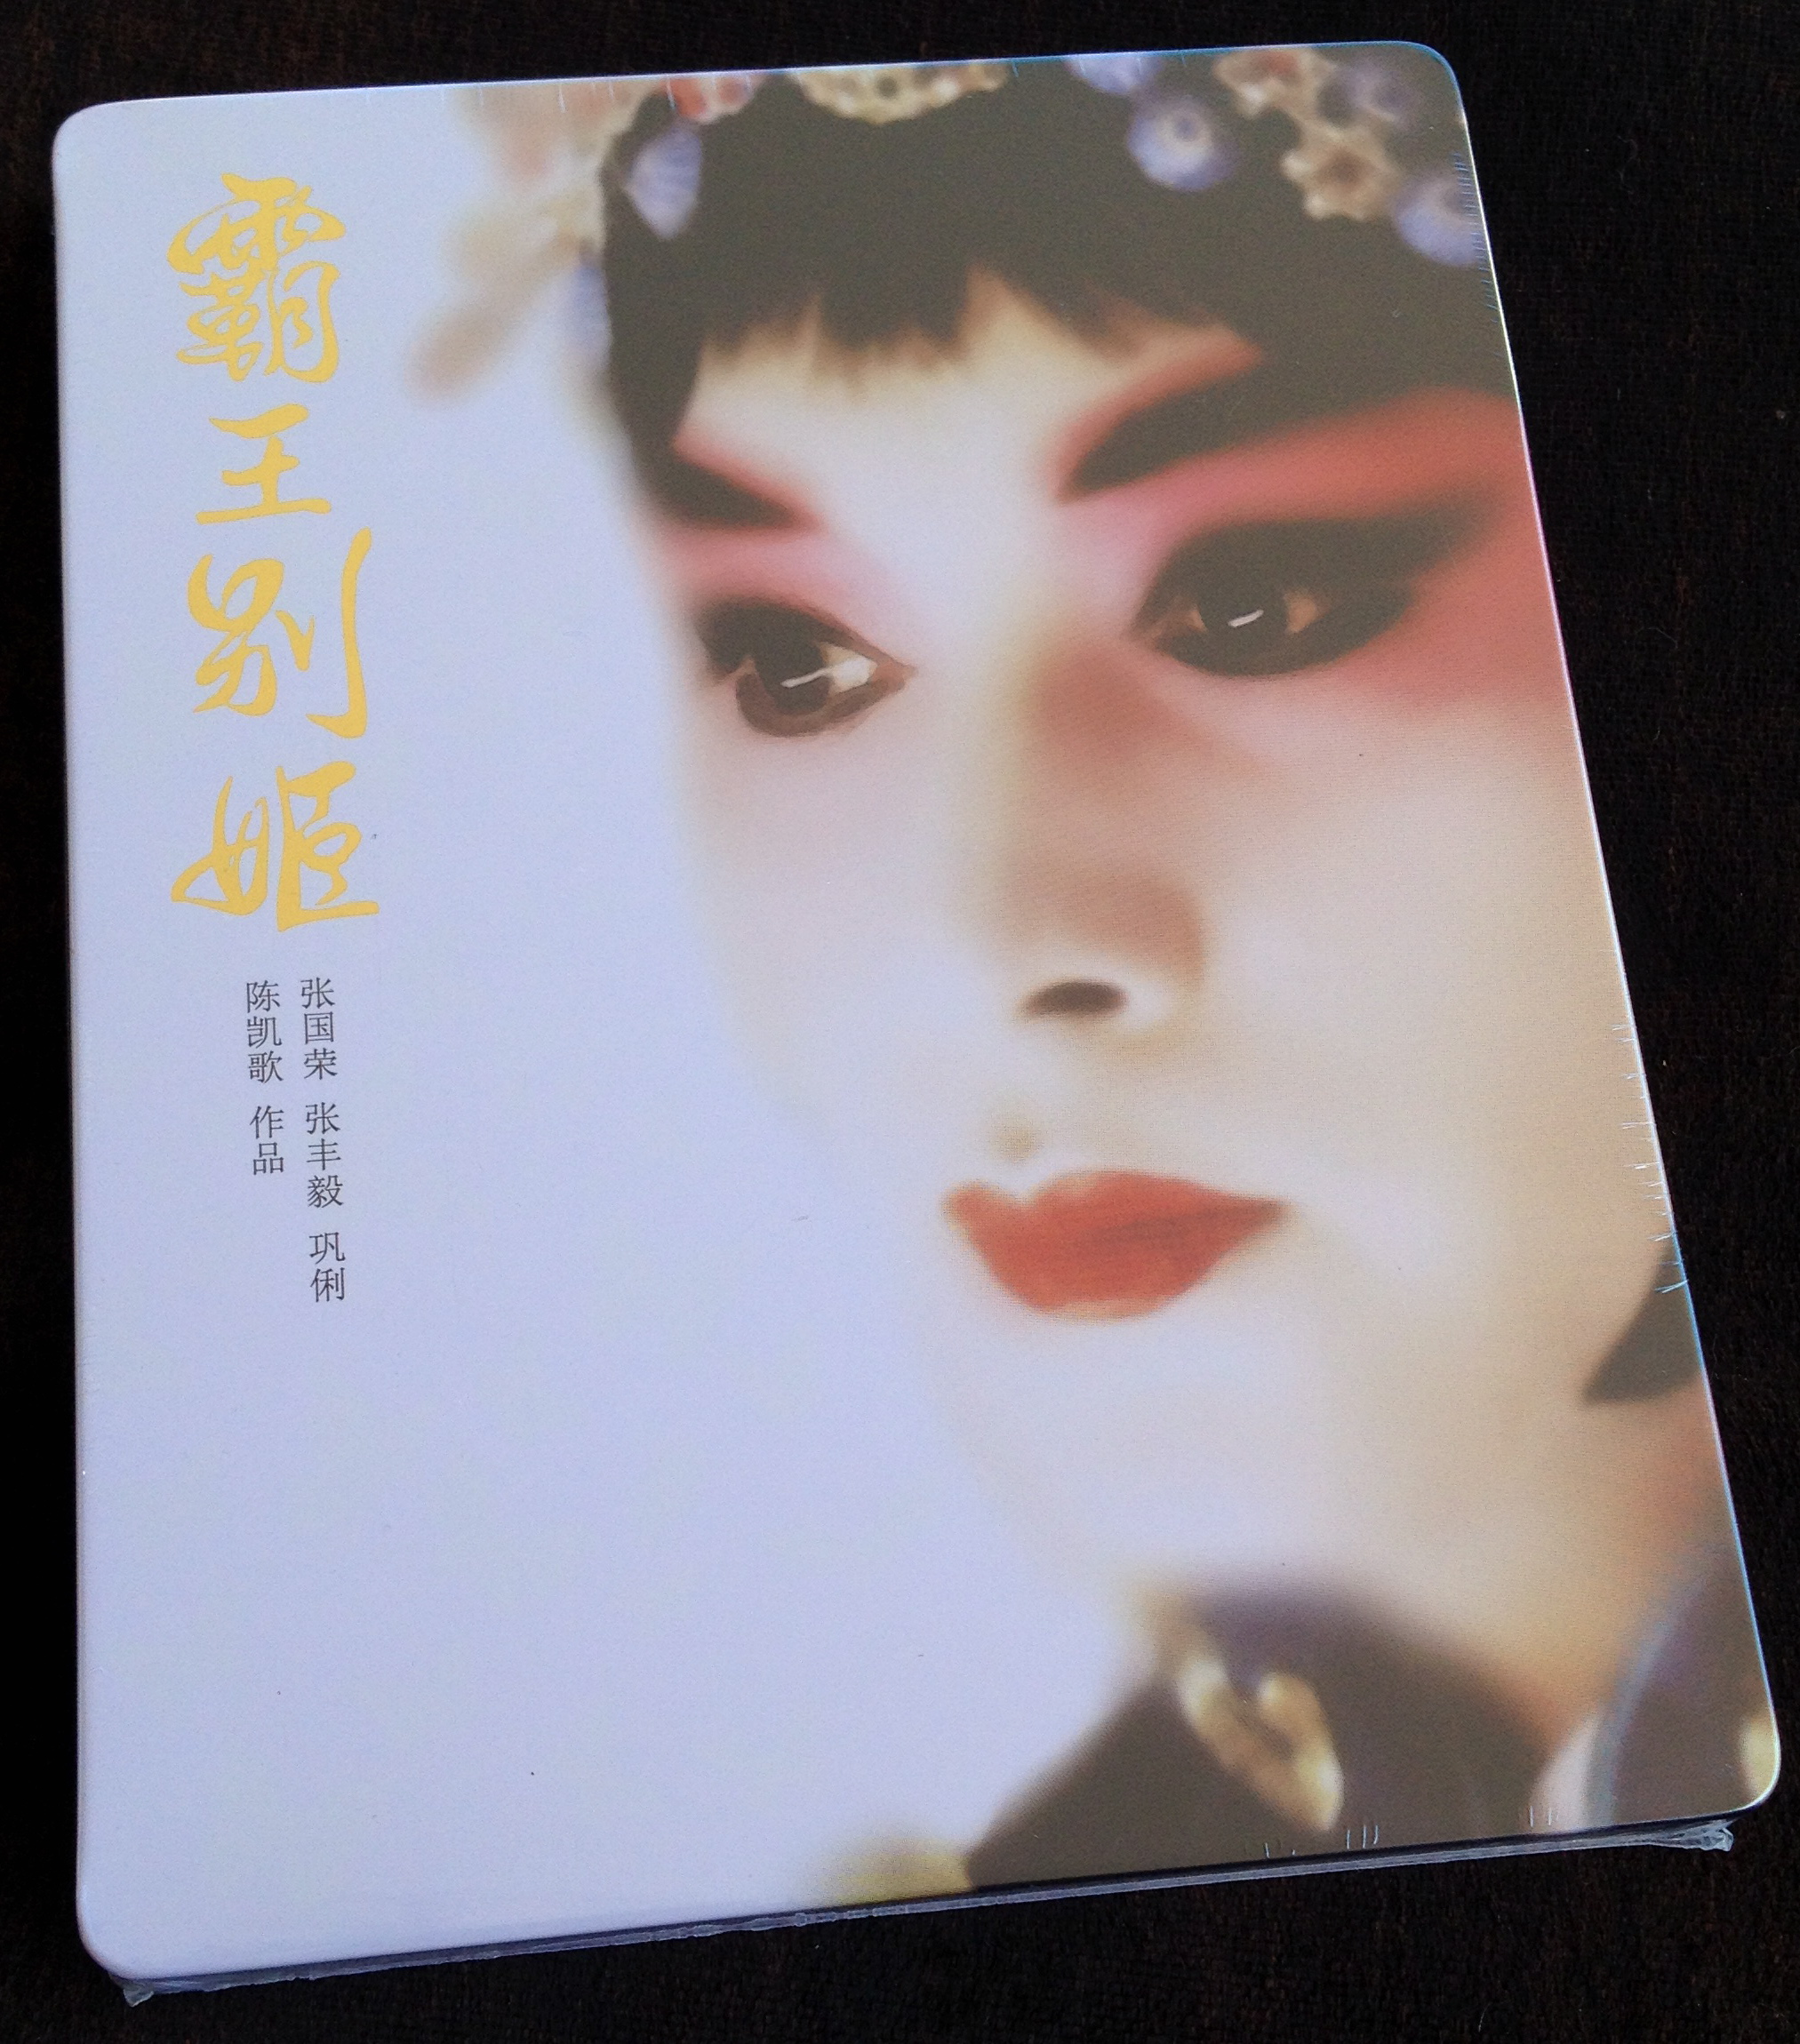 FAREWELL MY CONCUBINE (Blufans, CHINA)